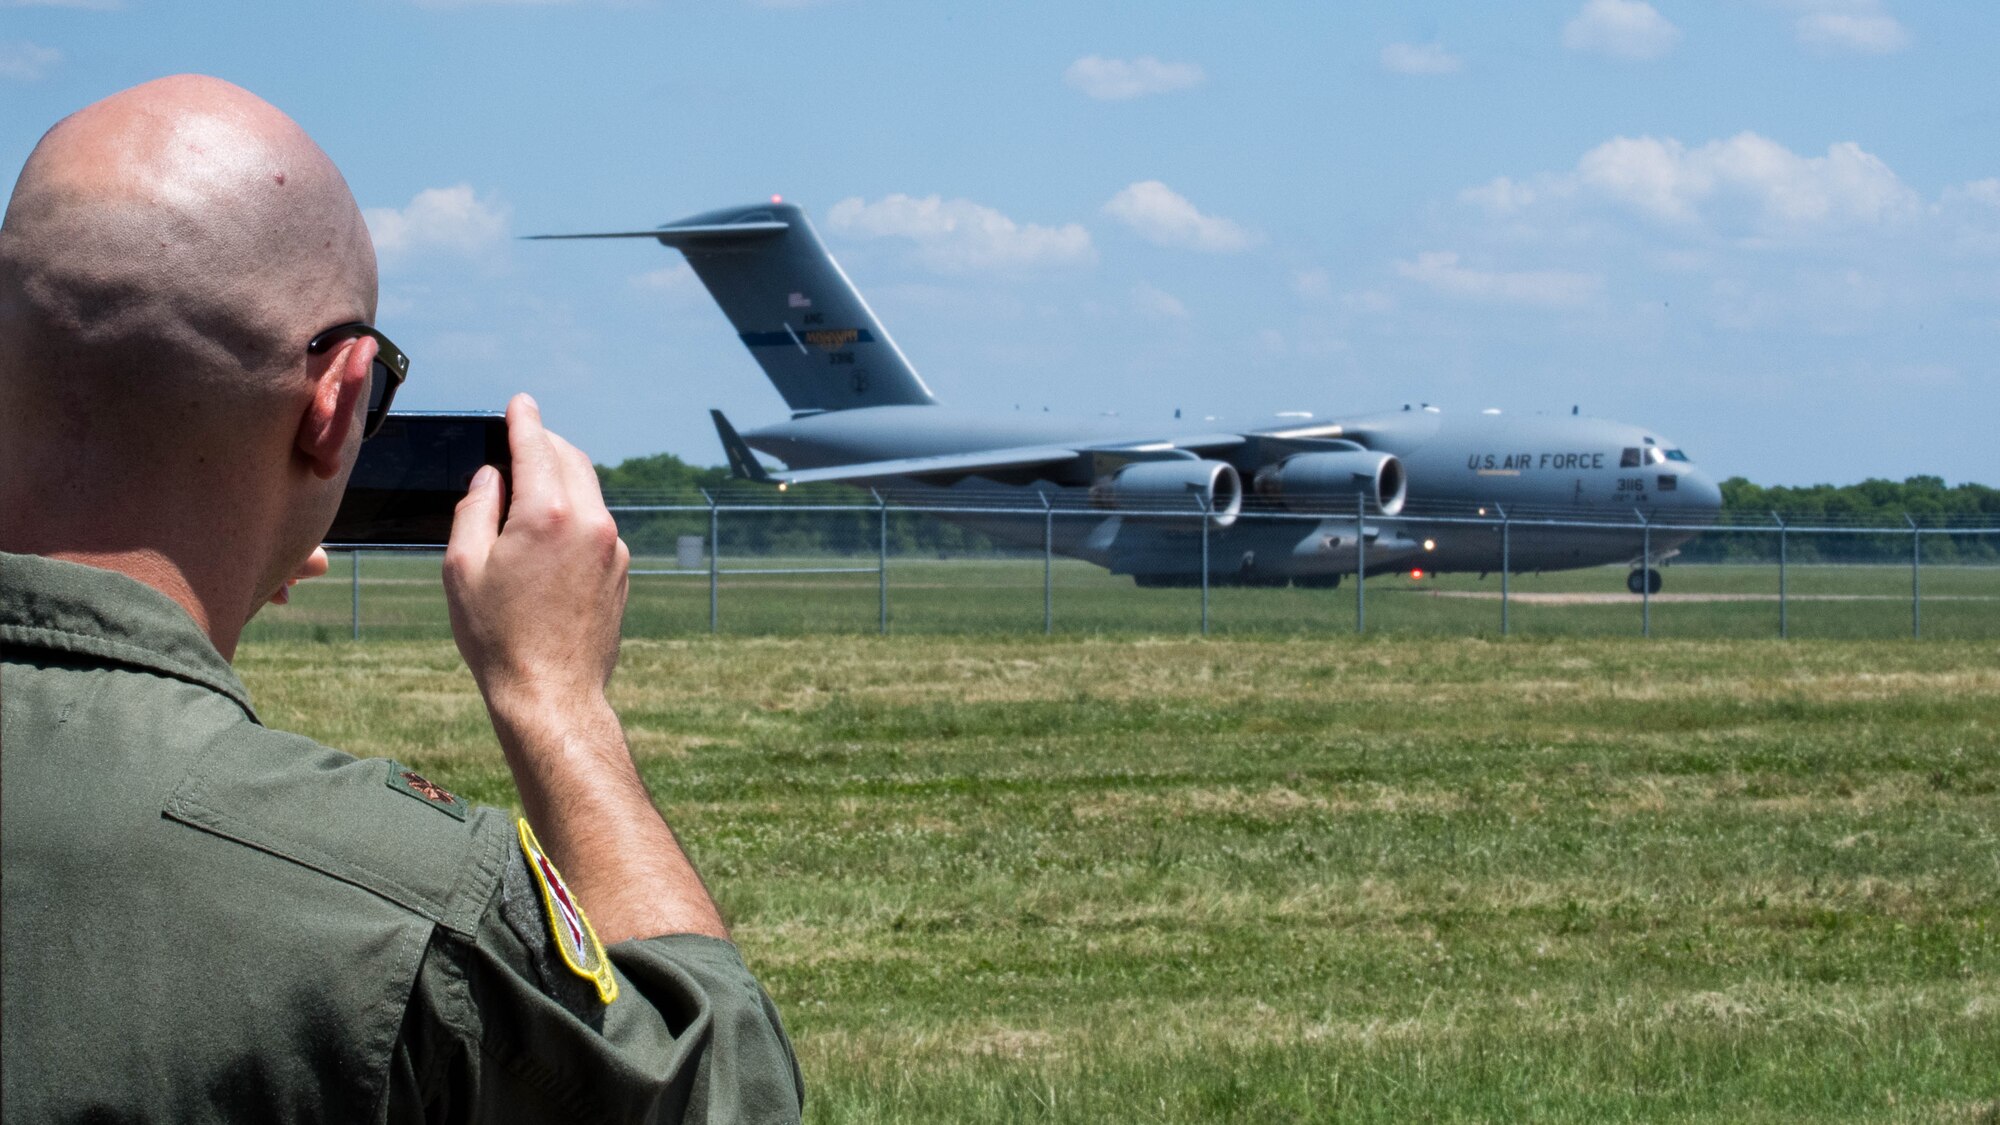 Maj. John R. Blankenship, a B-52 Stratofortress pilot with the 96th Bomb Squadron, records his wife Maj. Natasha E. Blankenship, a C-17 Globemaster III pilot with the 183rd Airlift Squadron in Jackson, Mississippi, as she lands a C-17 as apart of the Barksdale Defenders of Liberty Air Show at Barksdale Air Force Base, La., May 16, 2019. The Blankenships met each other during pilots training and have been married for the past eight years. (U.S. Air Force photo by Airman Jacob B. Wrightsman)